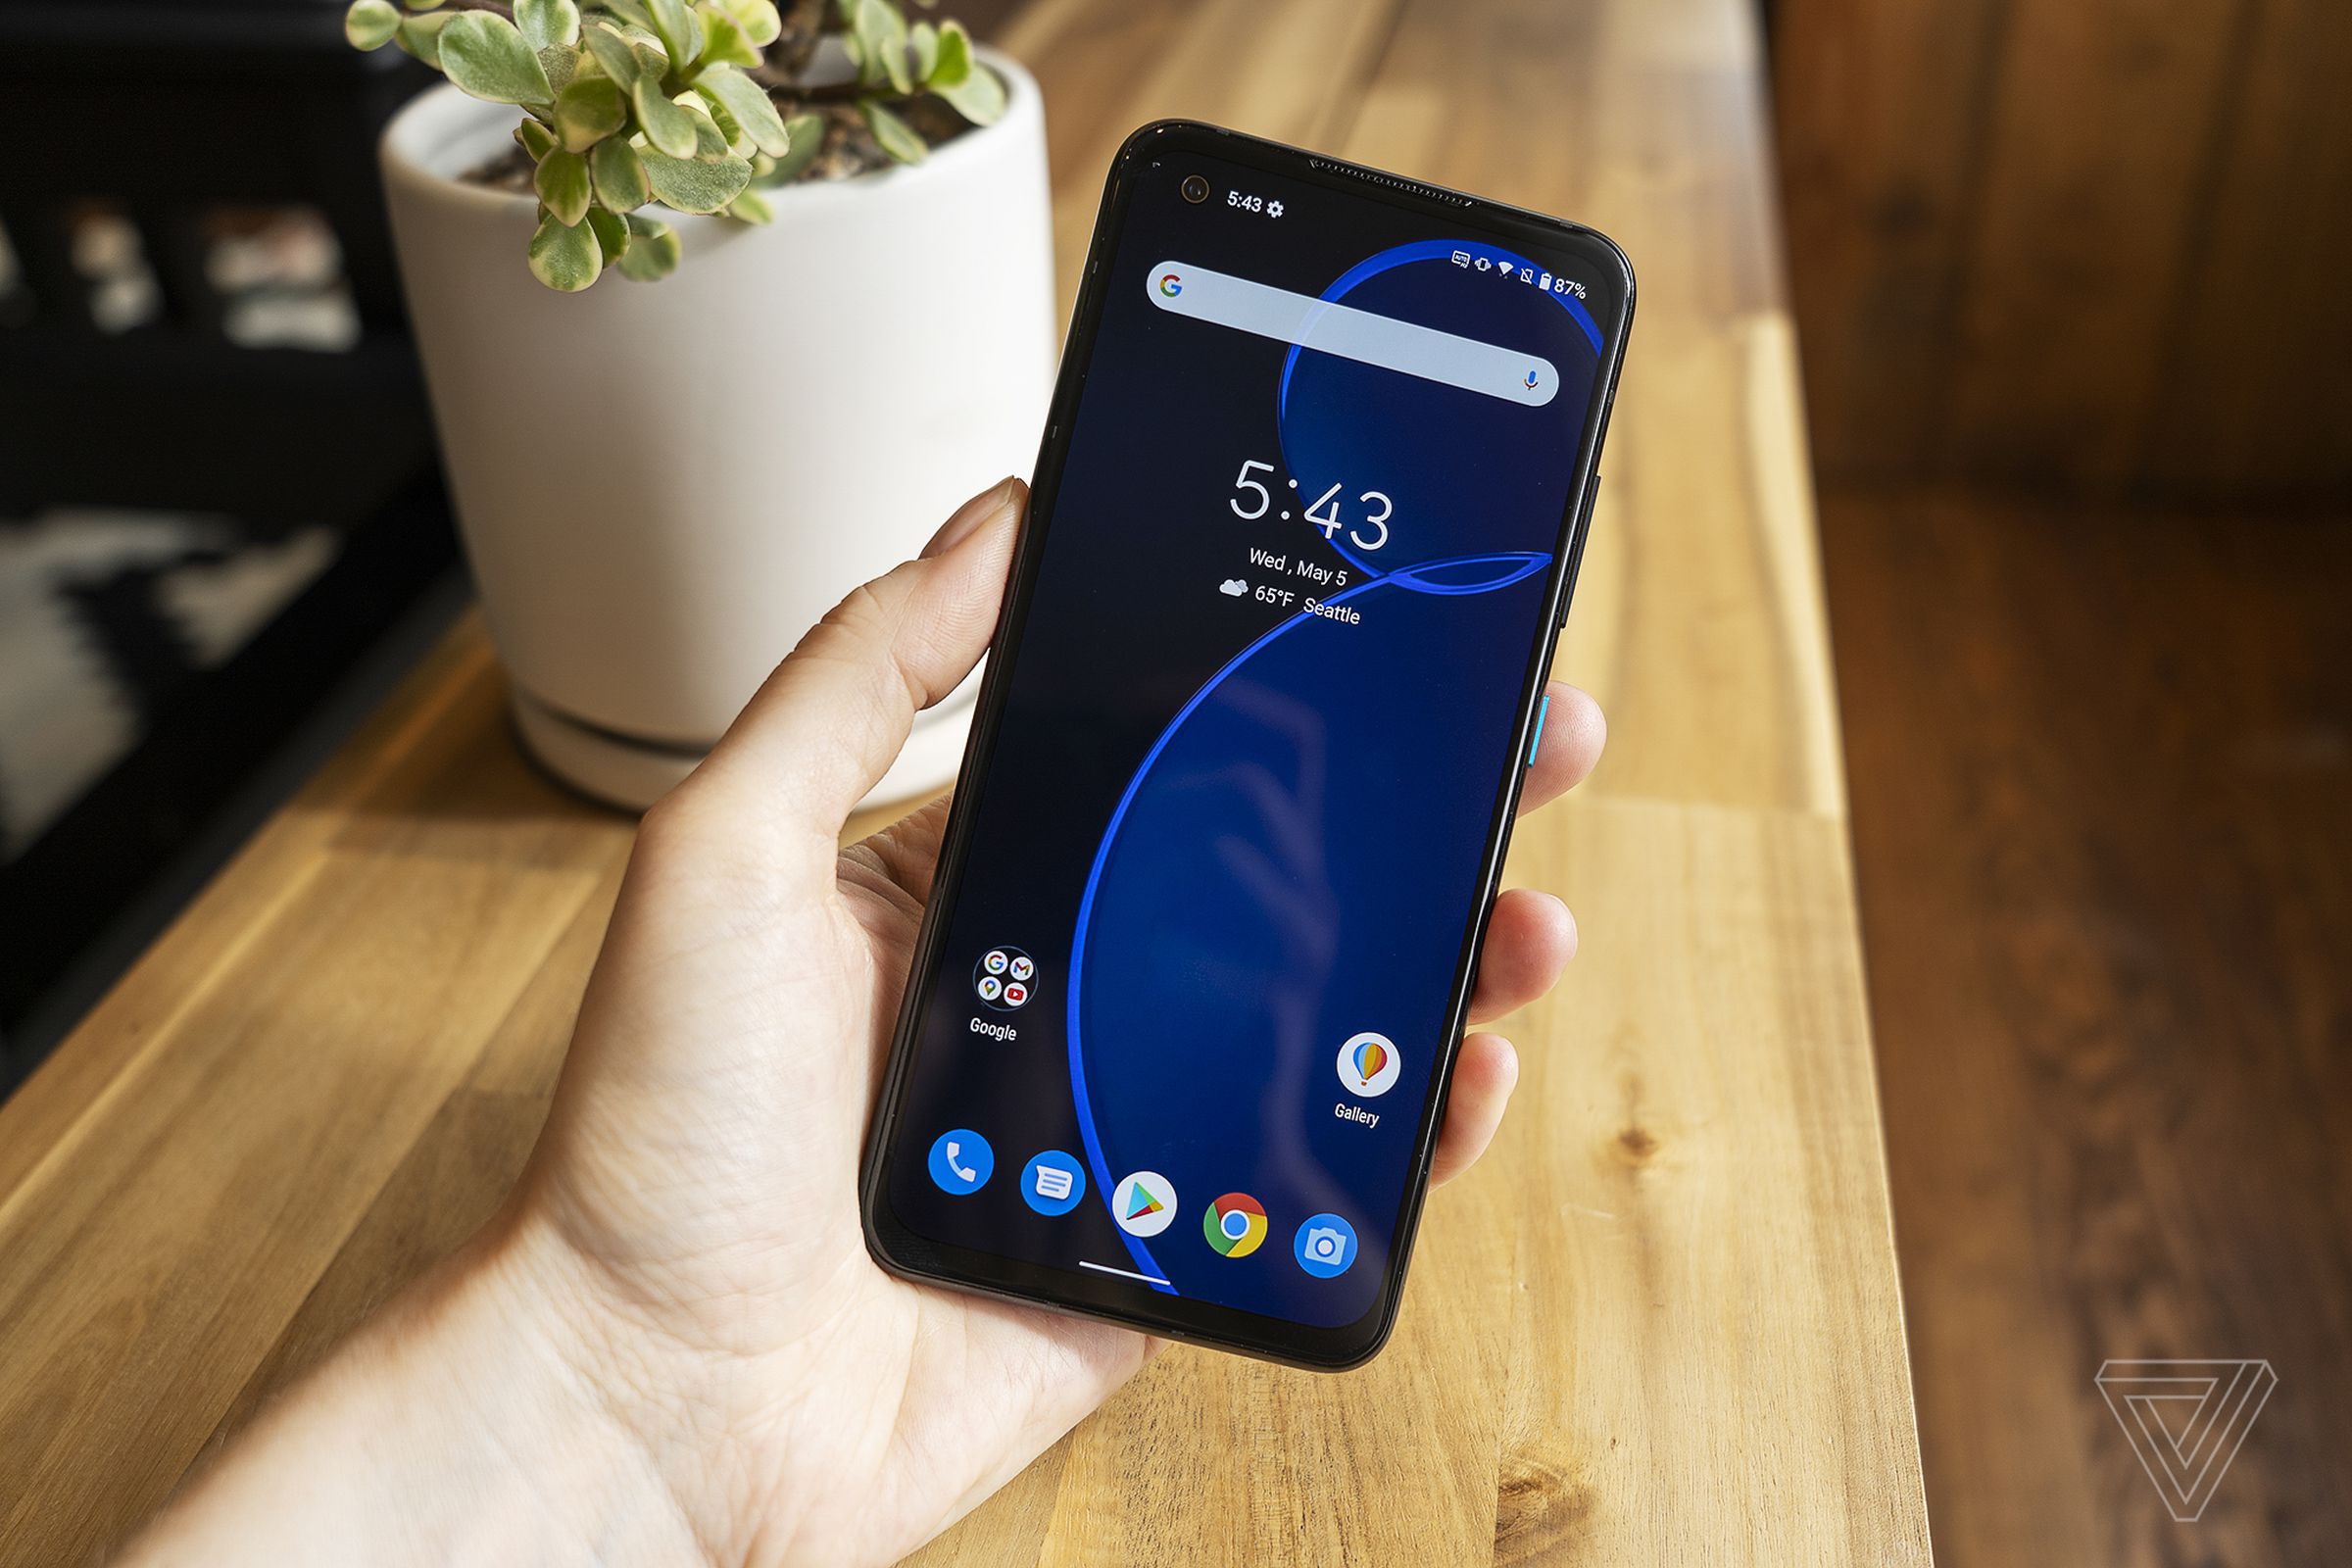 Asus designed the ZenFone 8 with one-handed operation in mind.